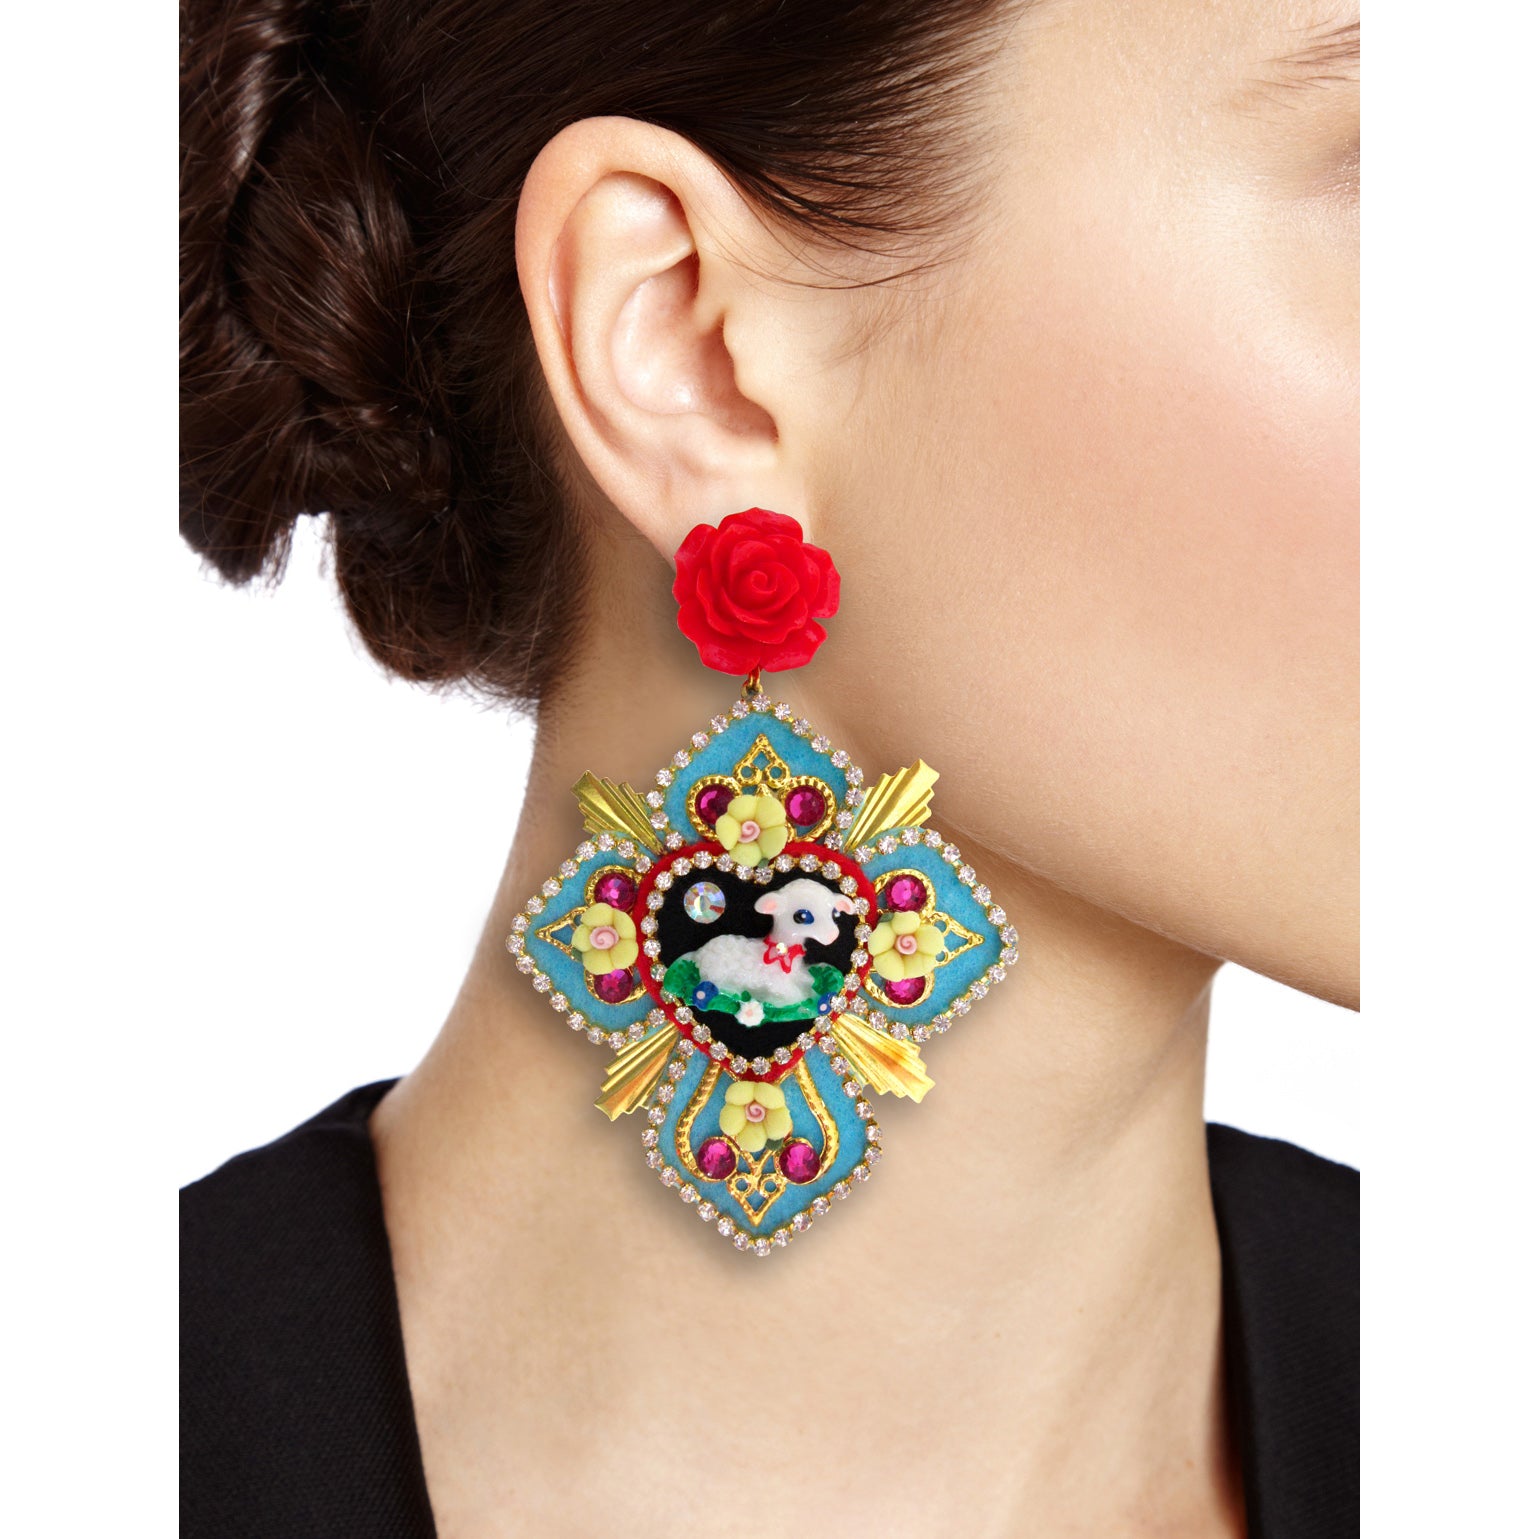 Mouchkine Jewelry couture glamour cross and sheep pendant earrings. 